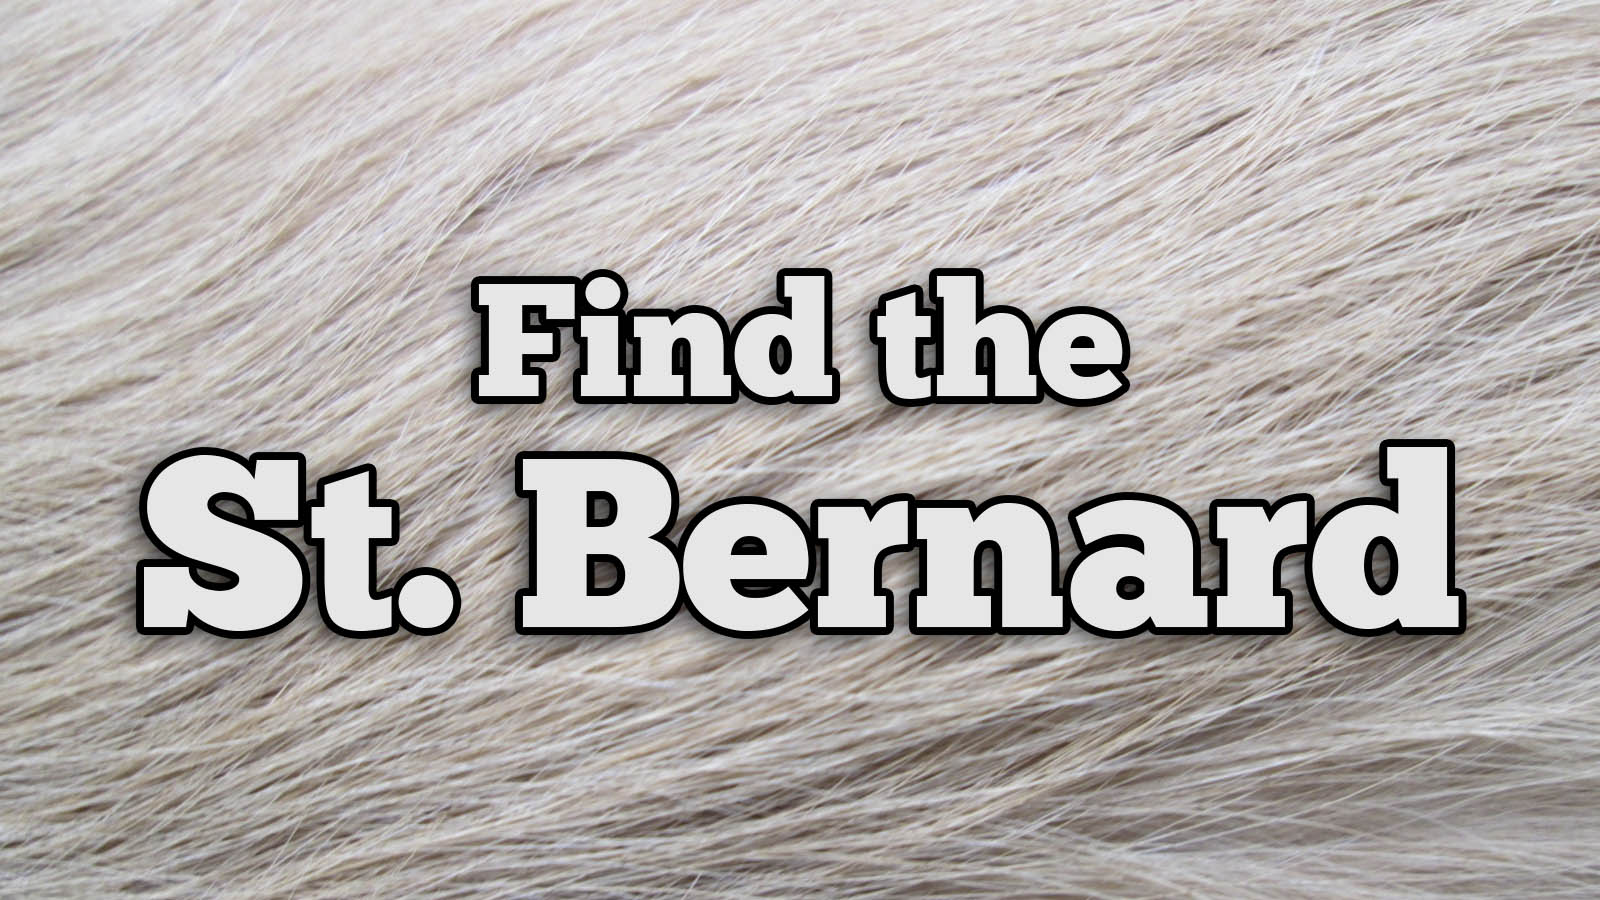 We Bet You Can’t Identify More Than 20/27 of These Dog Breeds Text St. Bernard